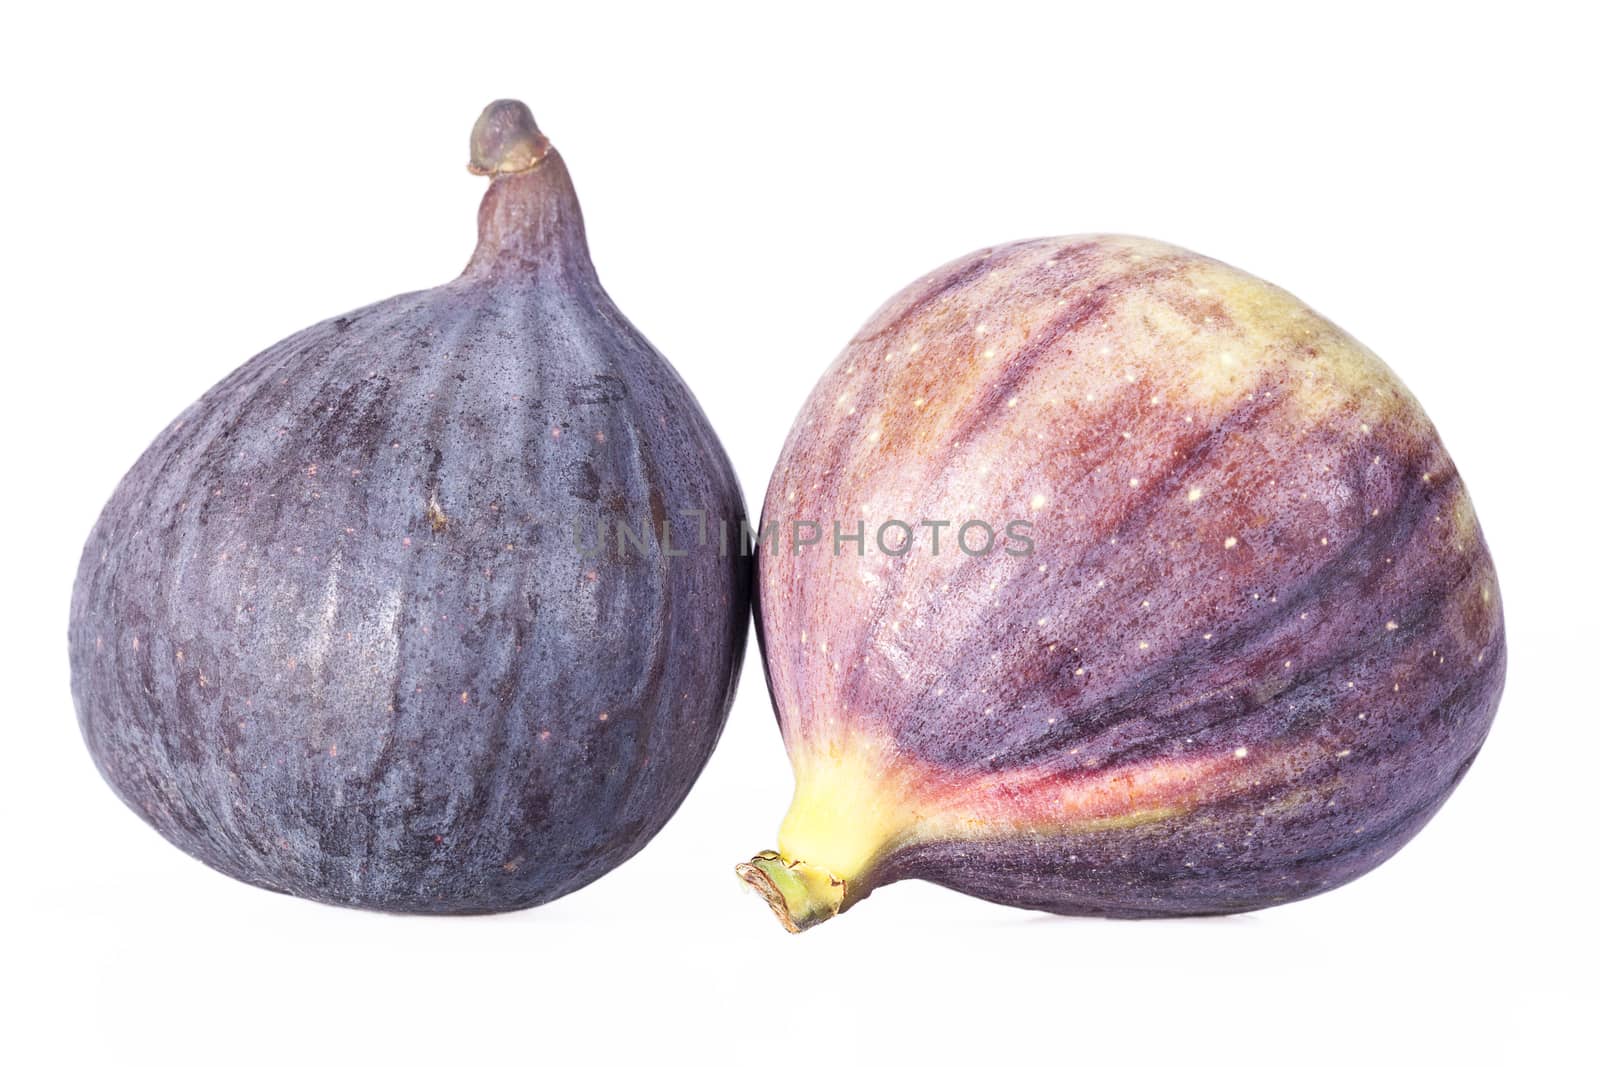 Fruits of fresh figs isolated on white background by mychadre77